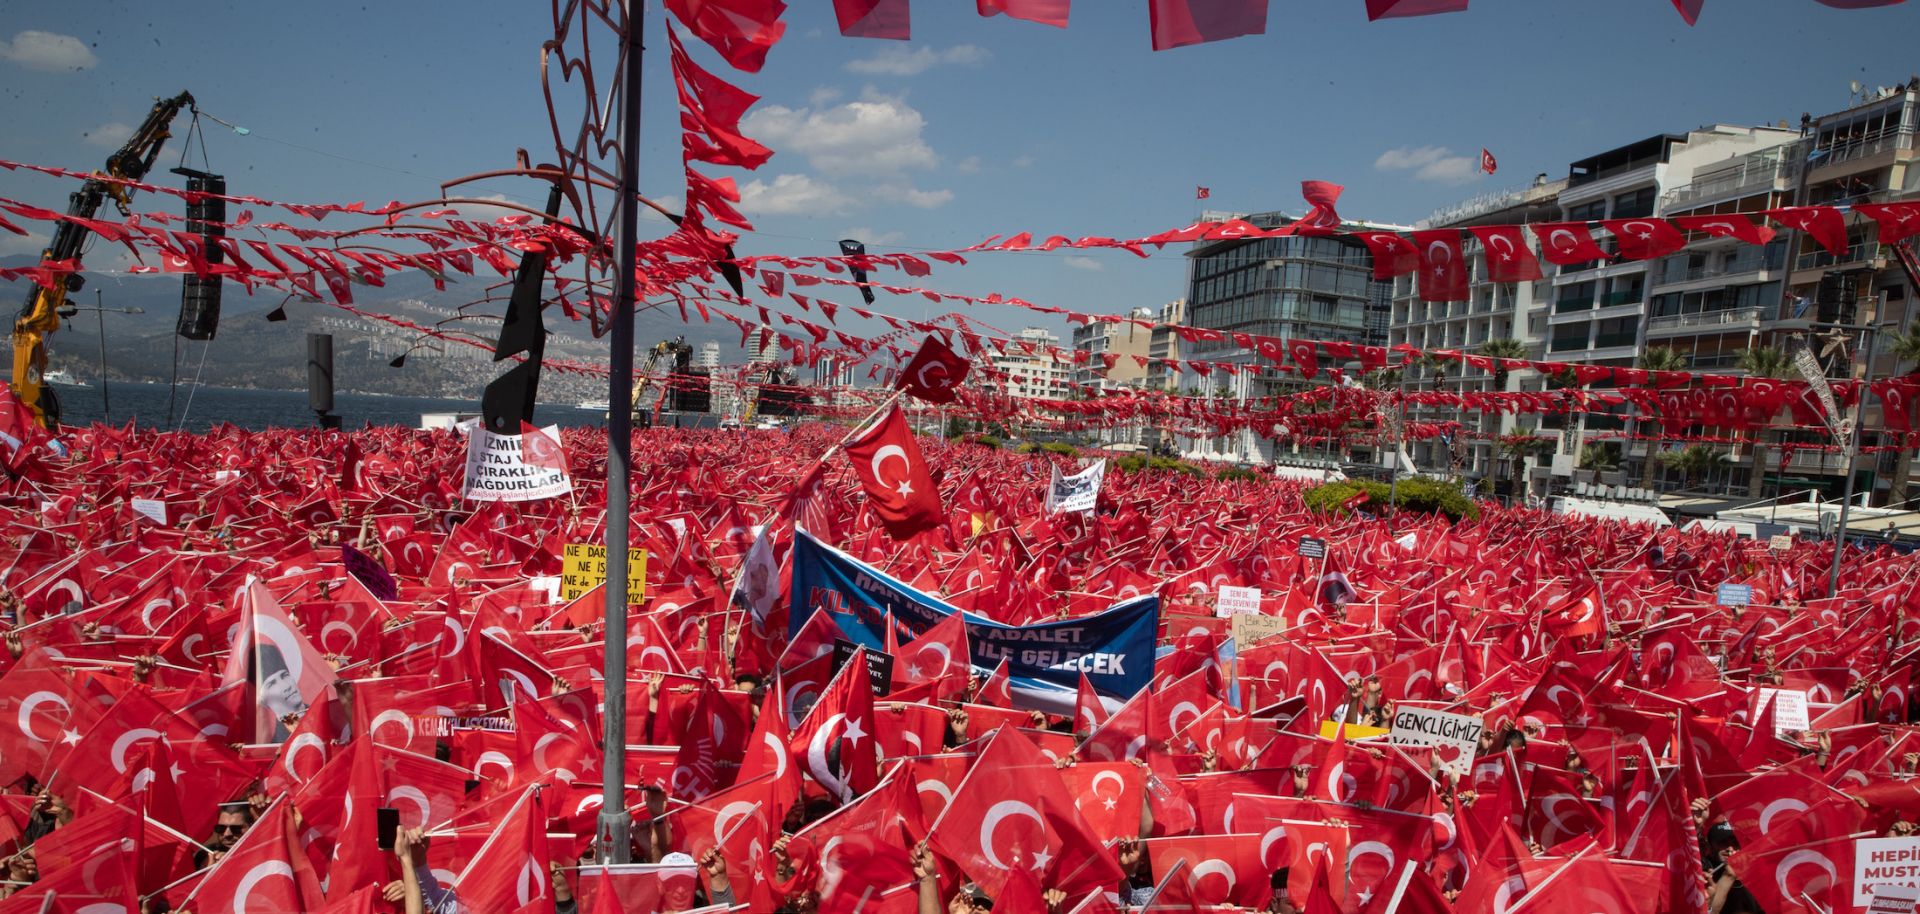 Opposition supporters wave Turkish flags and chant slogans while waiting for the arrival of their presidential candidate Kemal Kilicdaroglu during a campaign rally in Izmir, Turkey, on April 30, 2023.